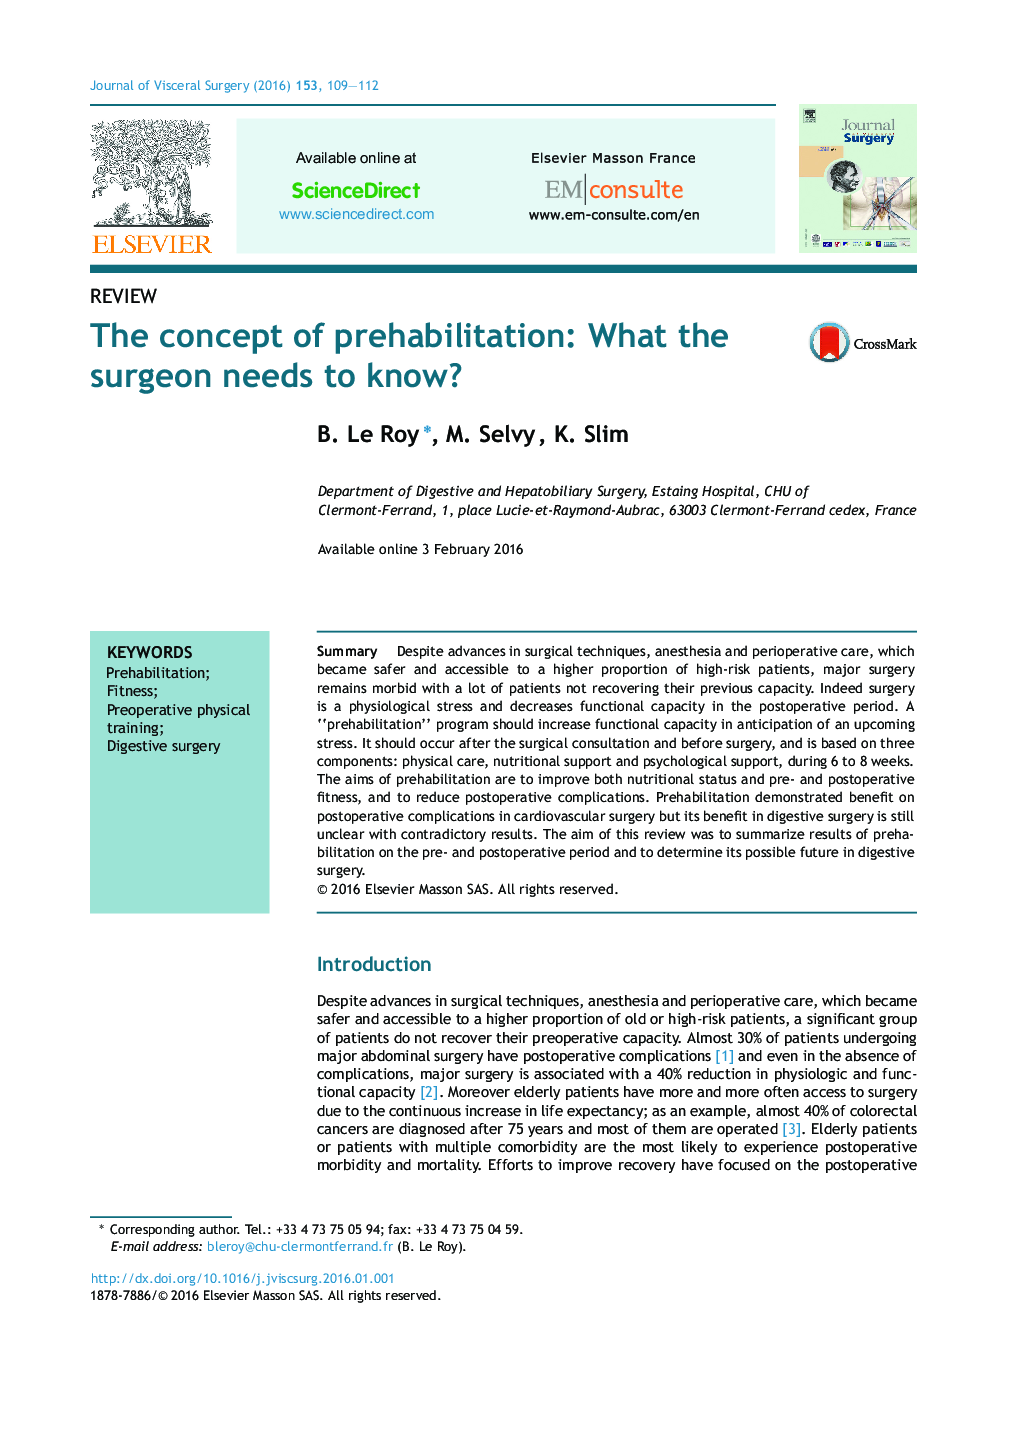 ReviewThe concept of prehabilitation: What the surgeon needs to know?